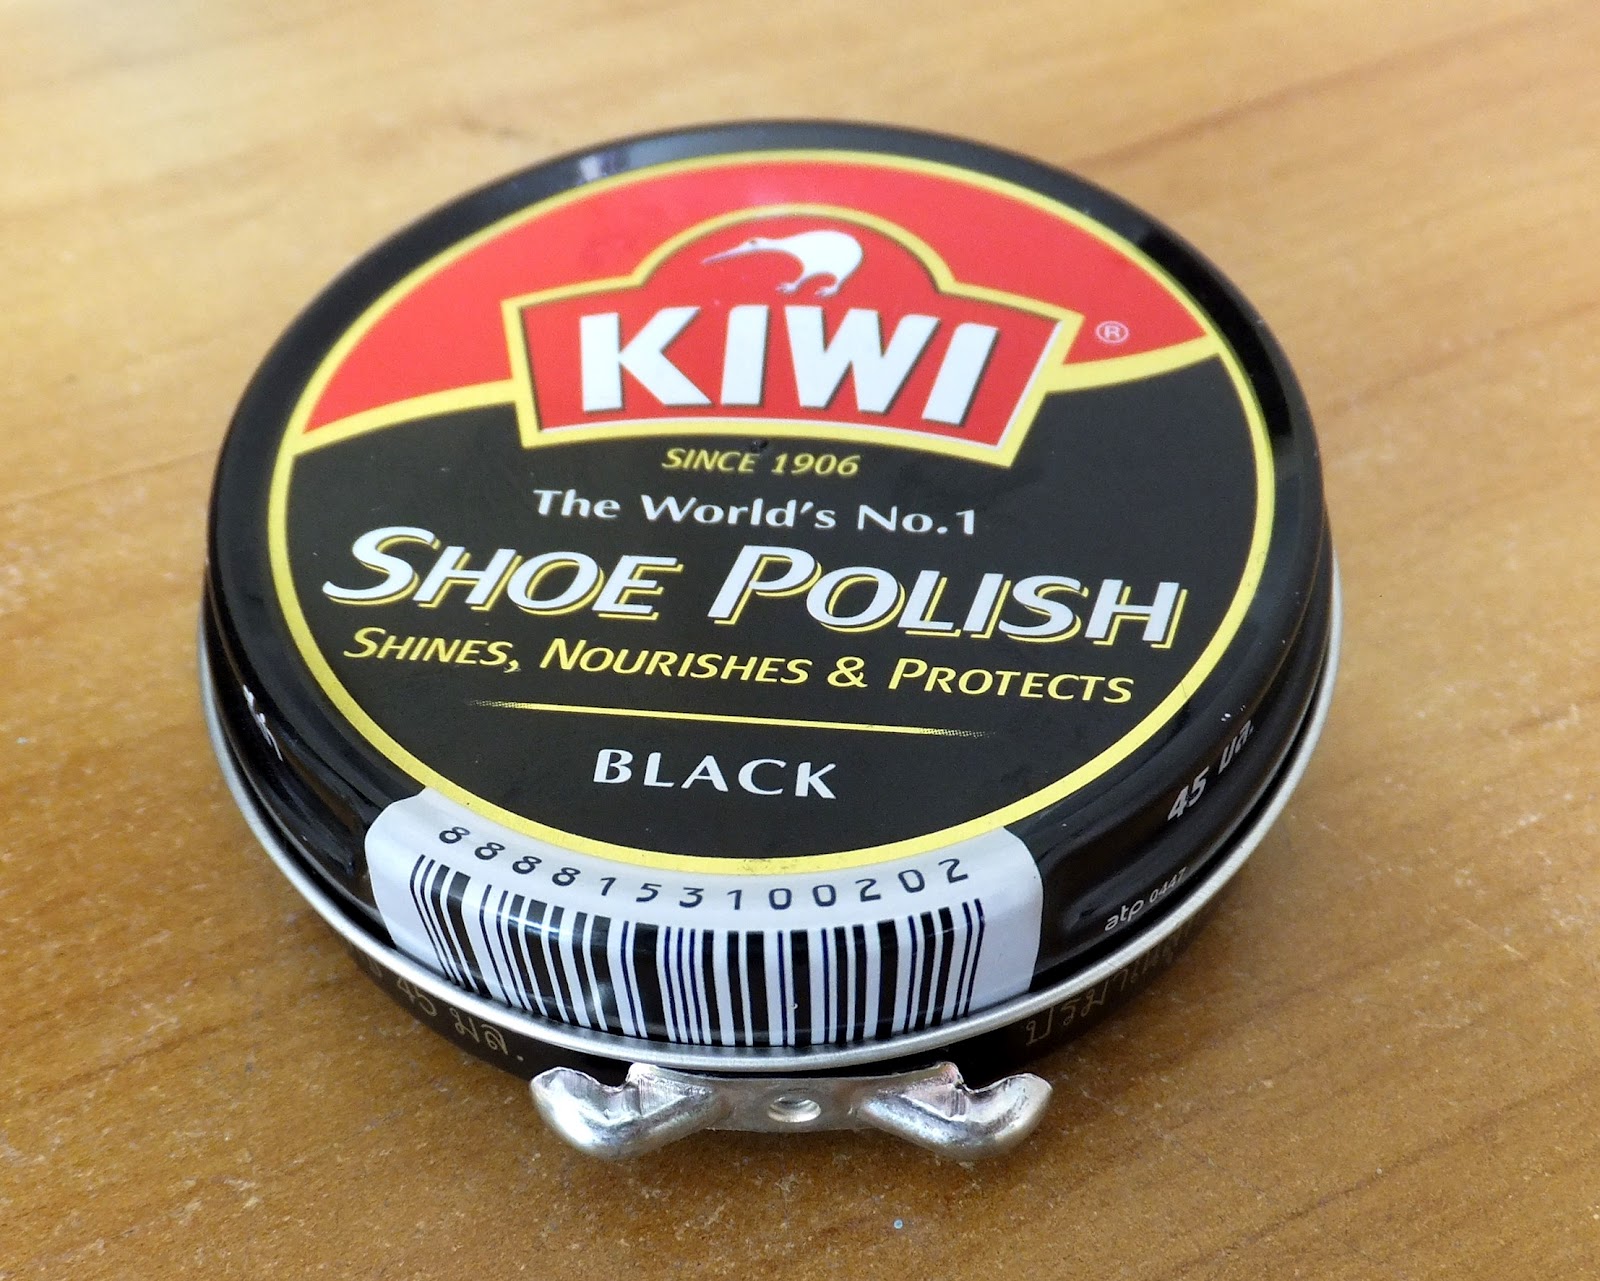 It's easier than you think to keep your shoes shining like new. Shoe polish is the short answer